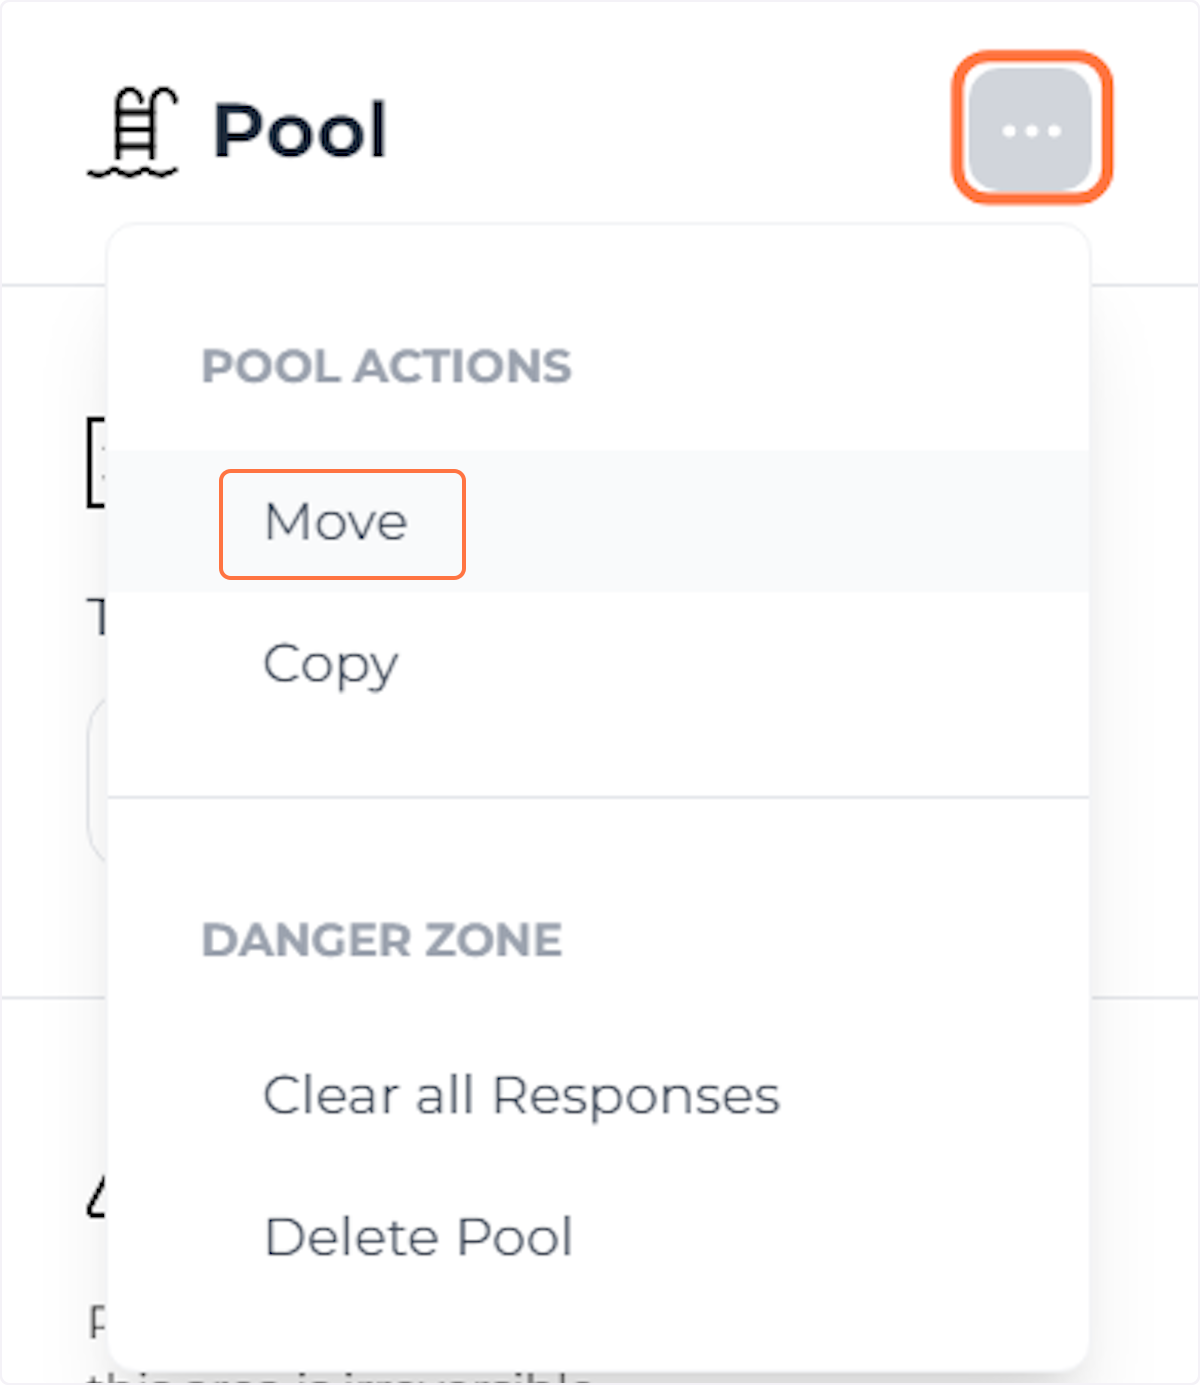 Open the 'Pool Actions' menu and click 'Move'.